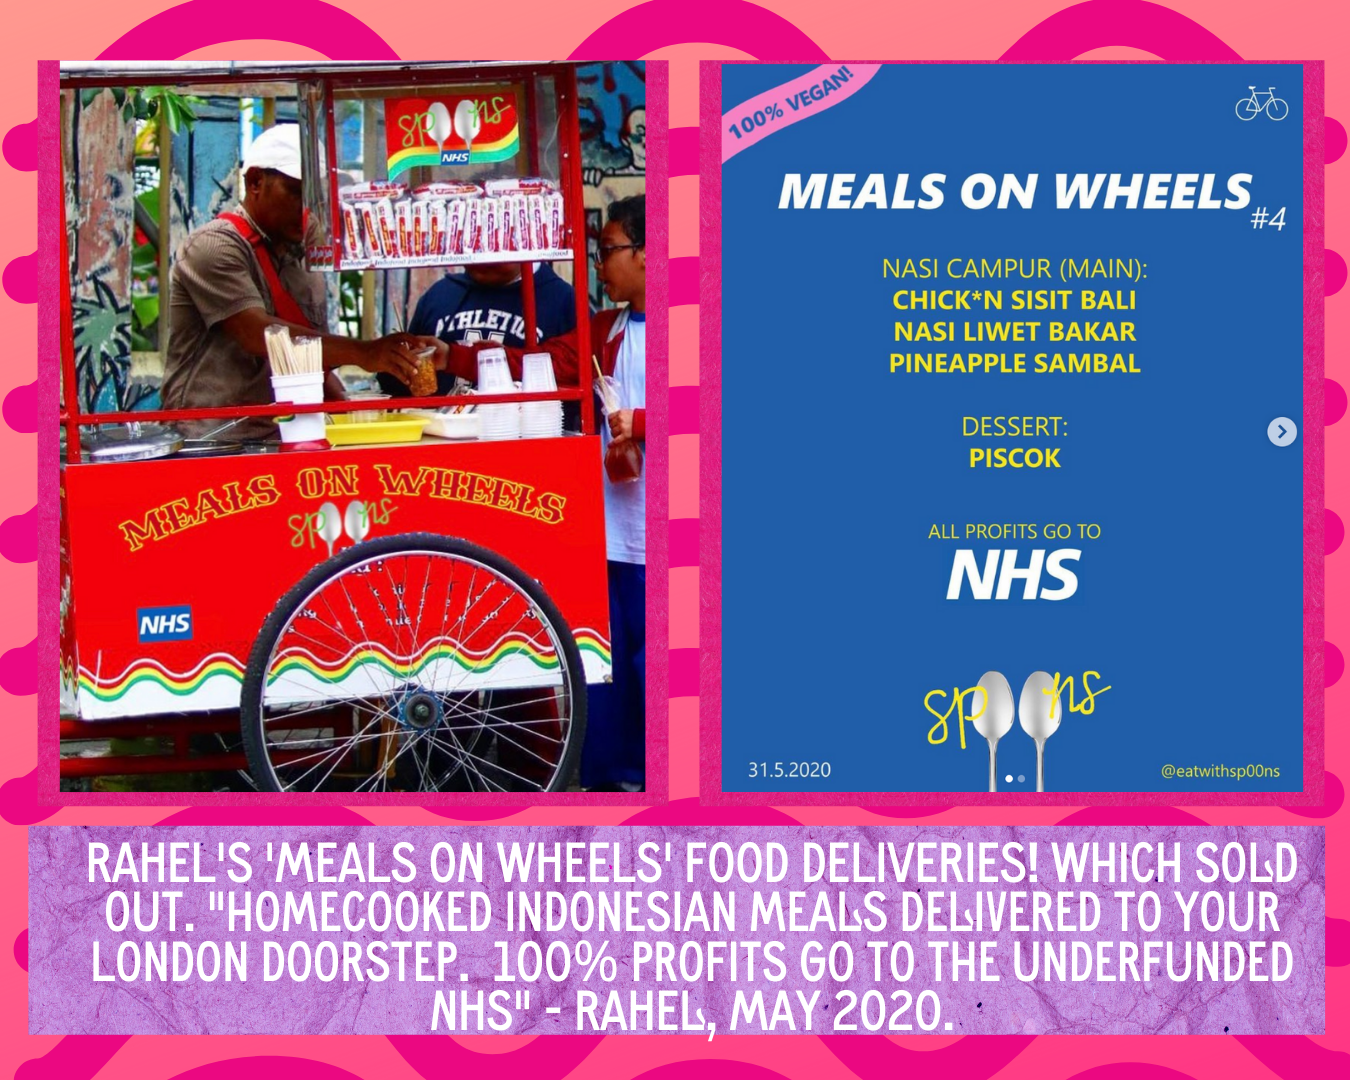 Two images; Rahel's meals on wheels food deliveries